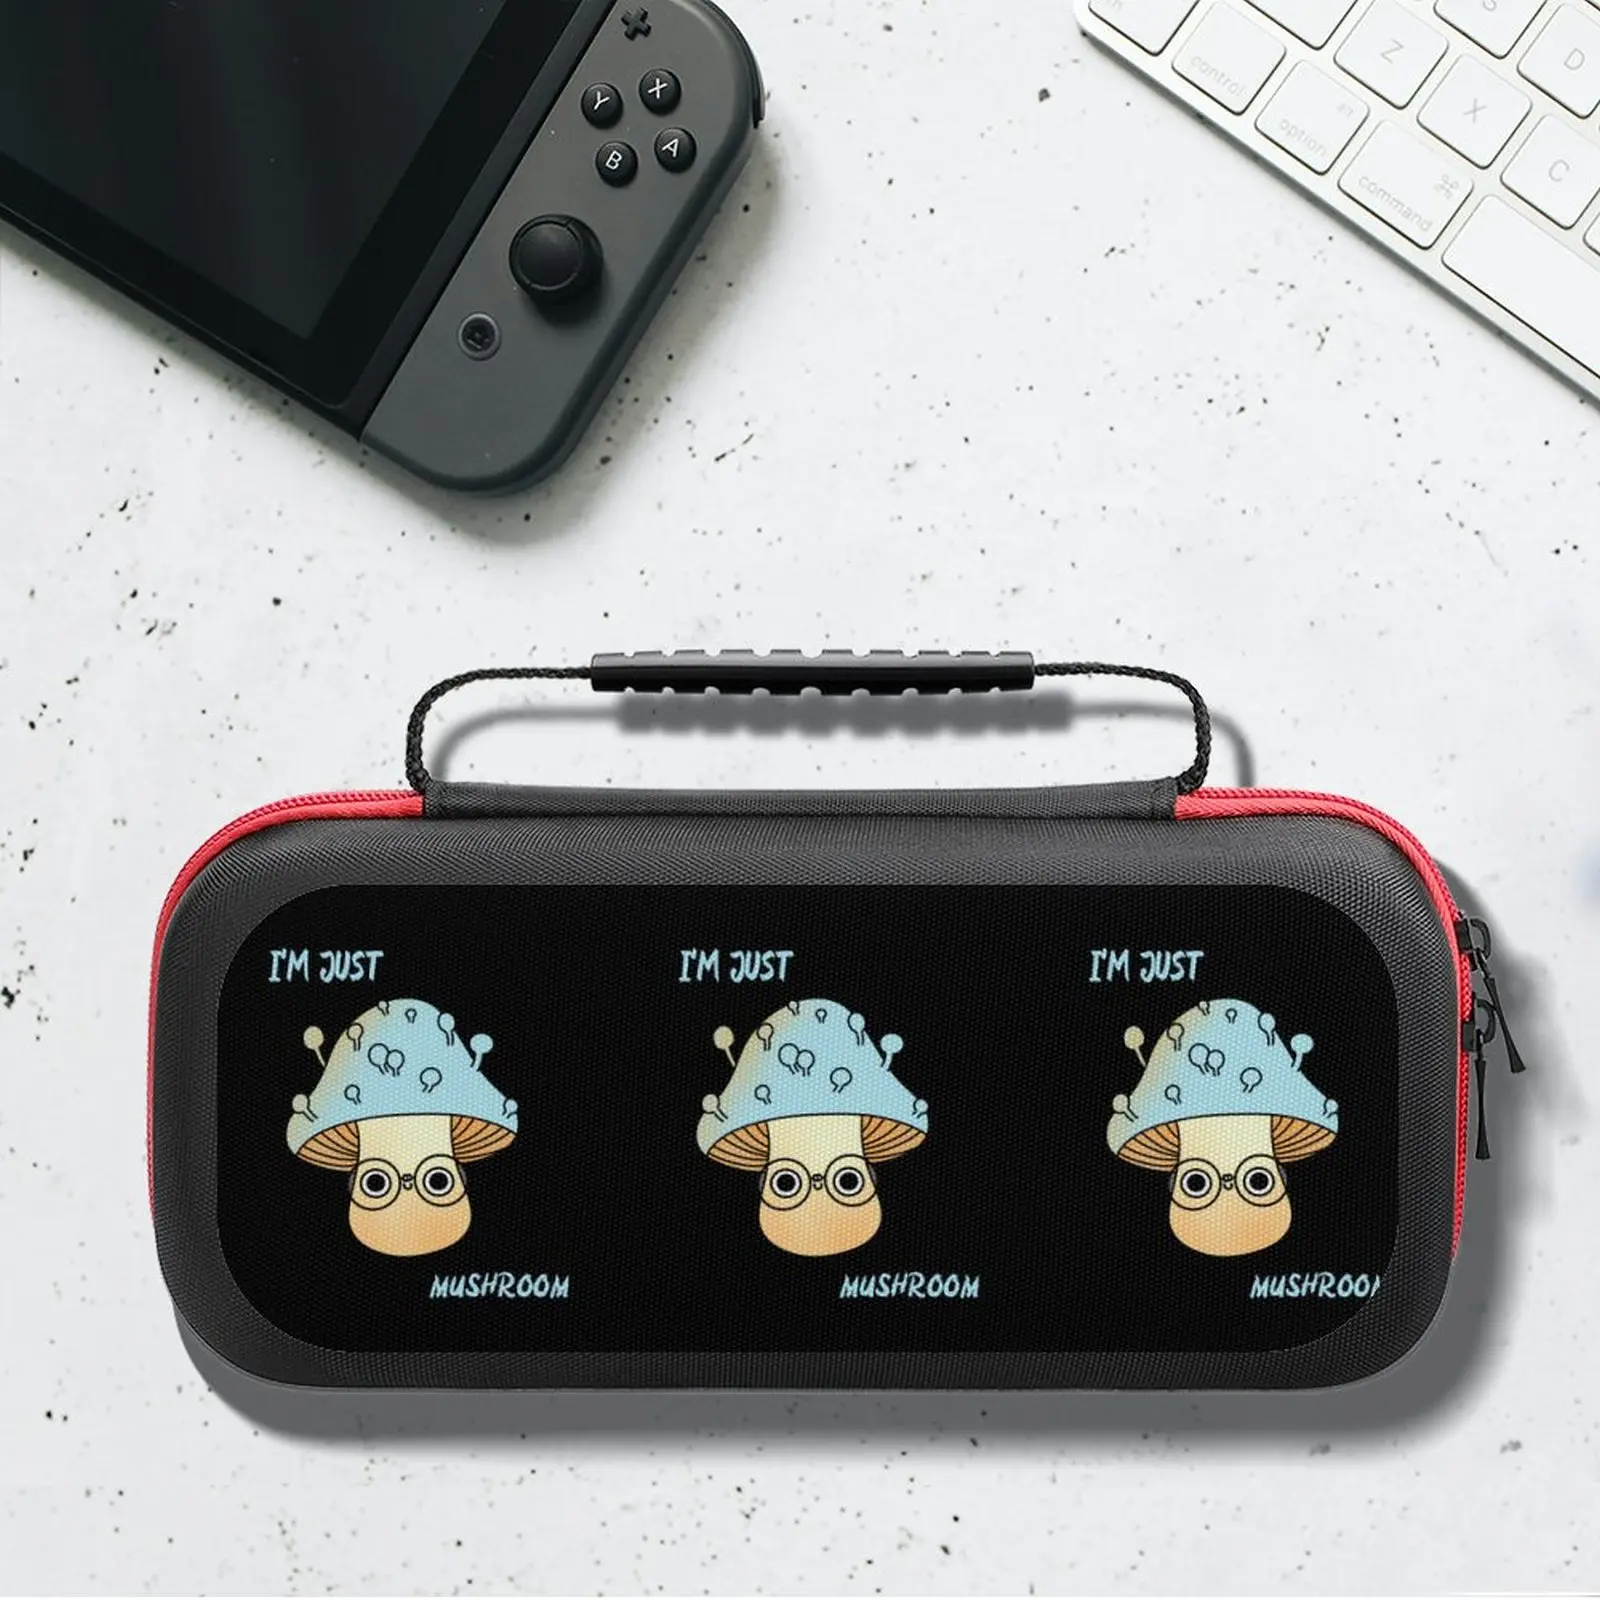 

SIMPLE MUSHROOM Storage Bag For Nintendo Switch Nice Smart Cute Set Funny Compact Game Accessories Daily NS Console